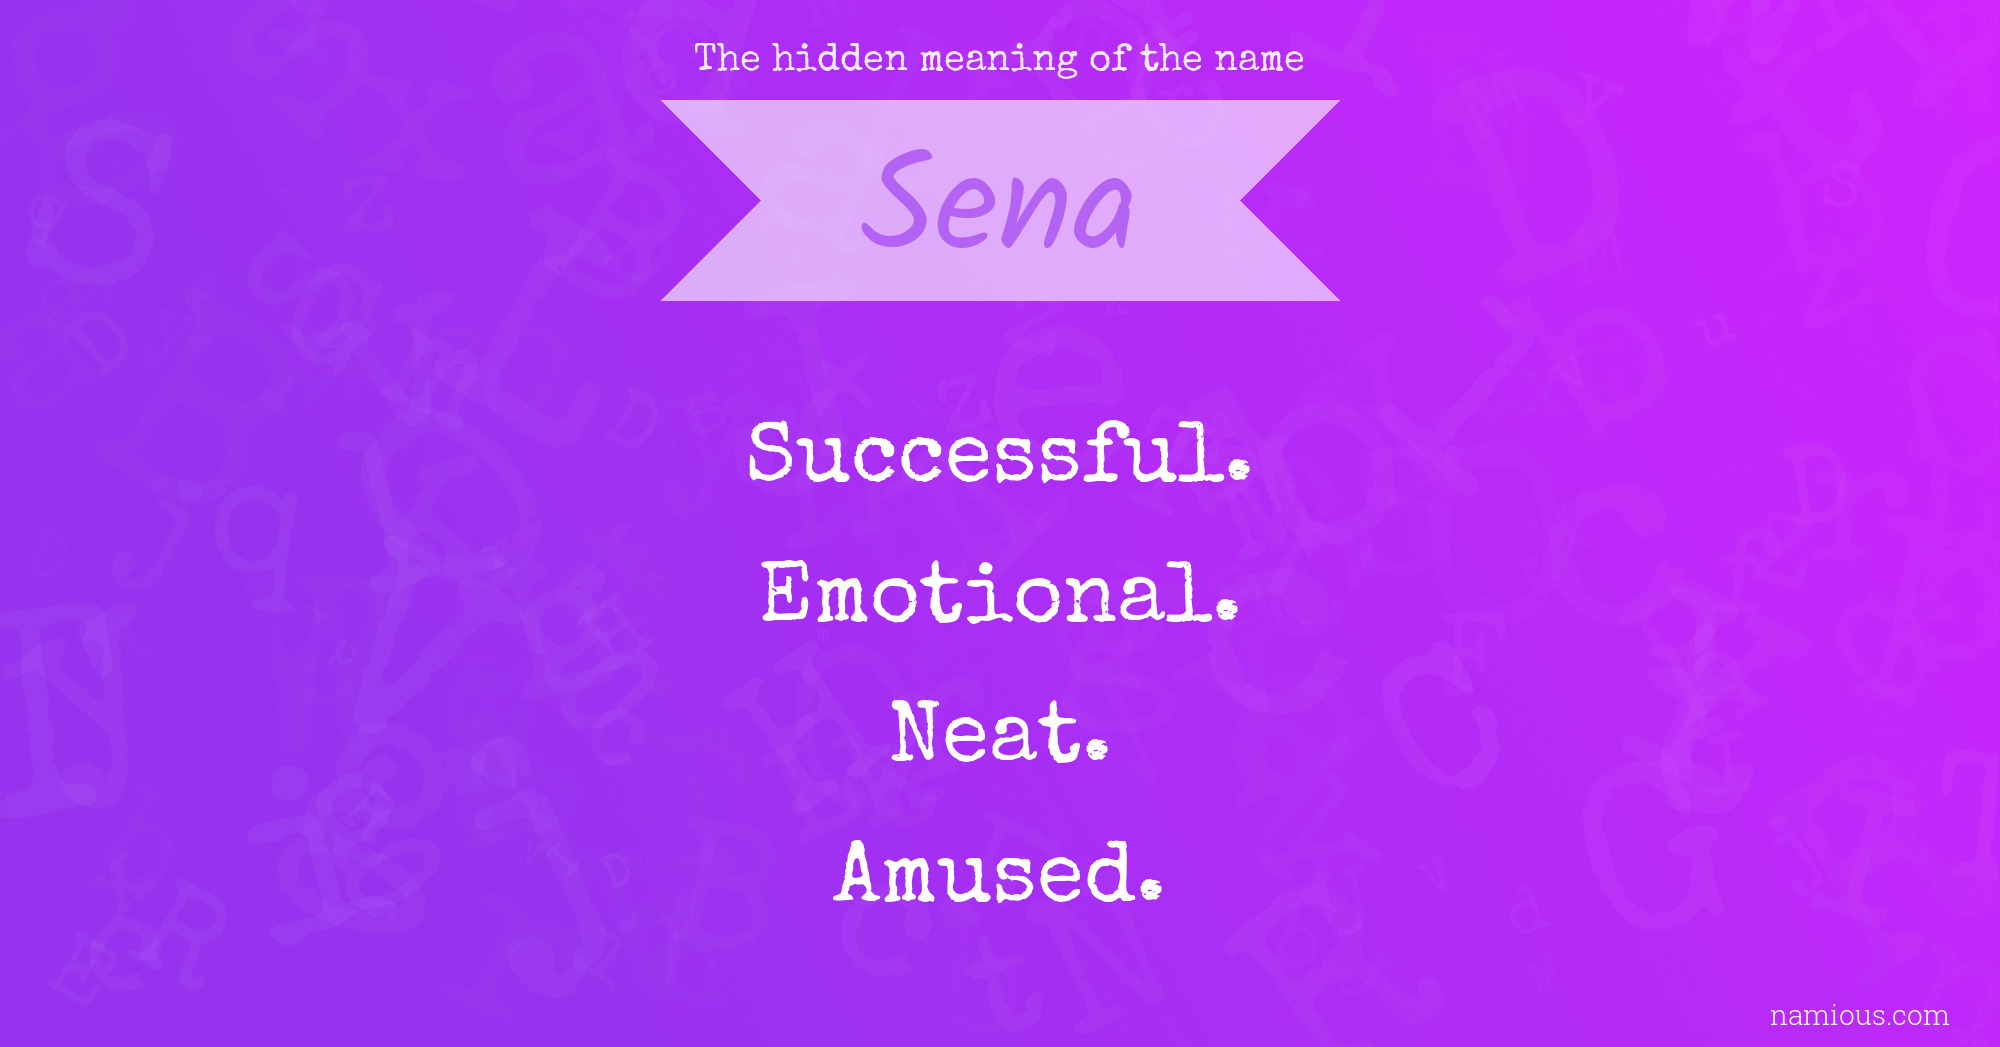 The hidden meaning of the name Sena